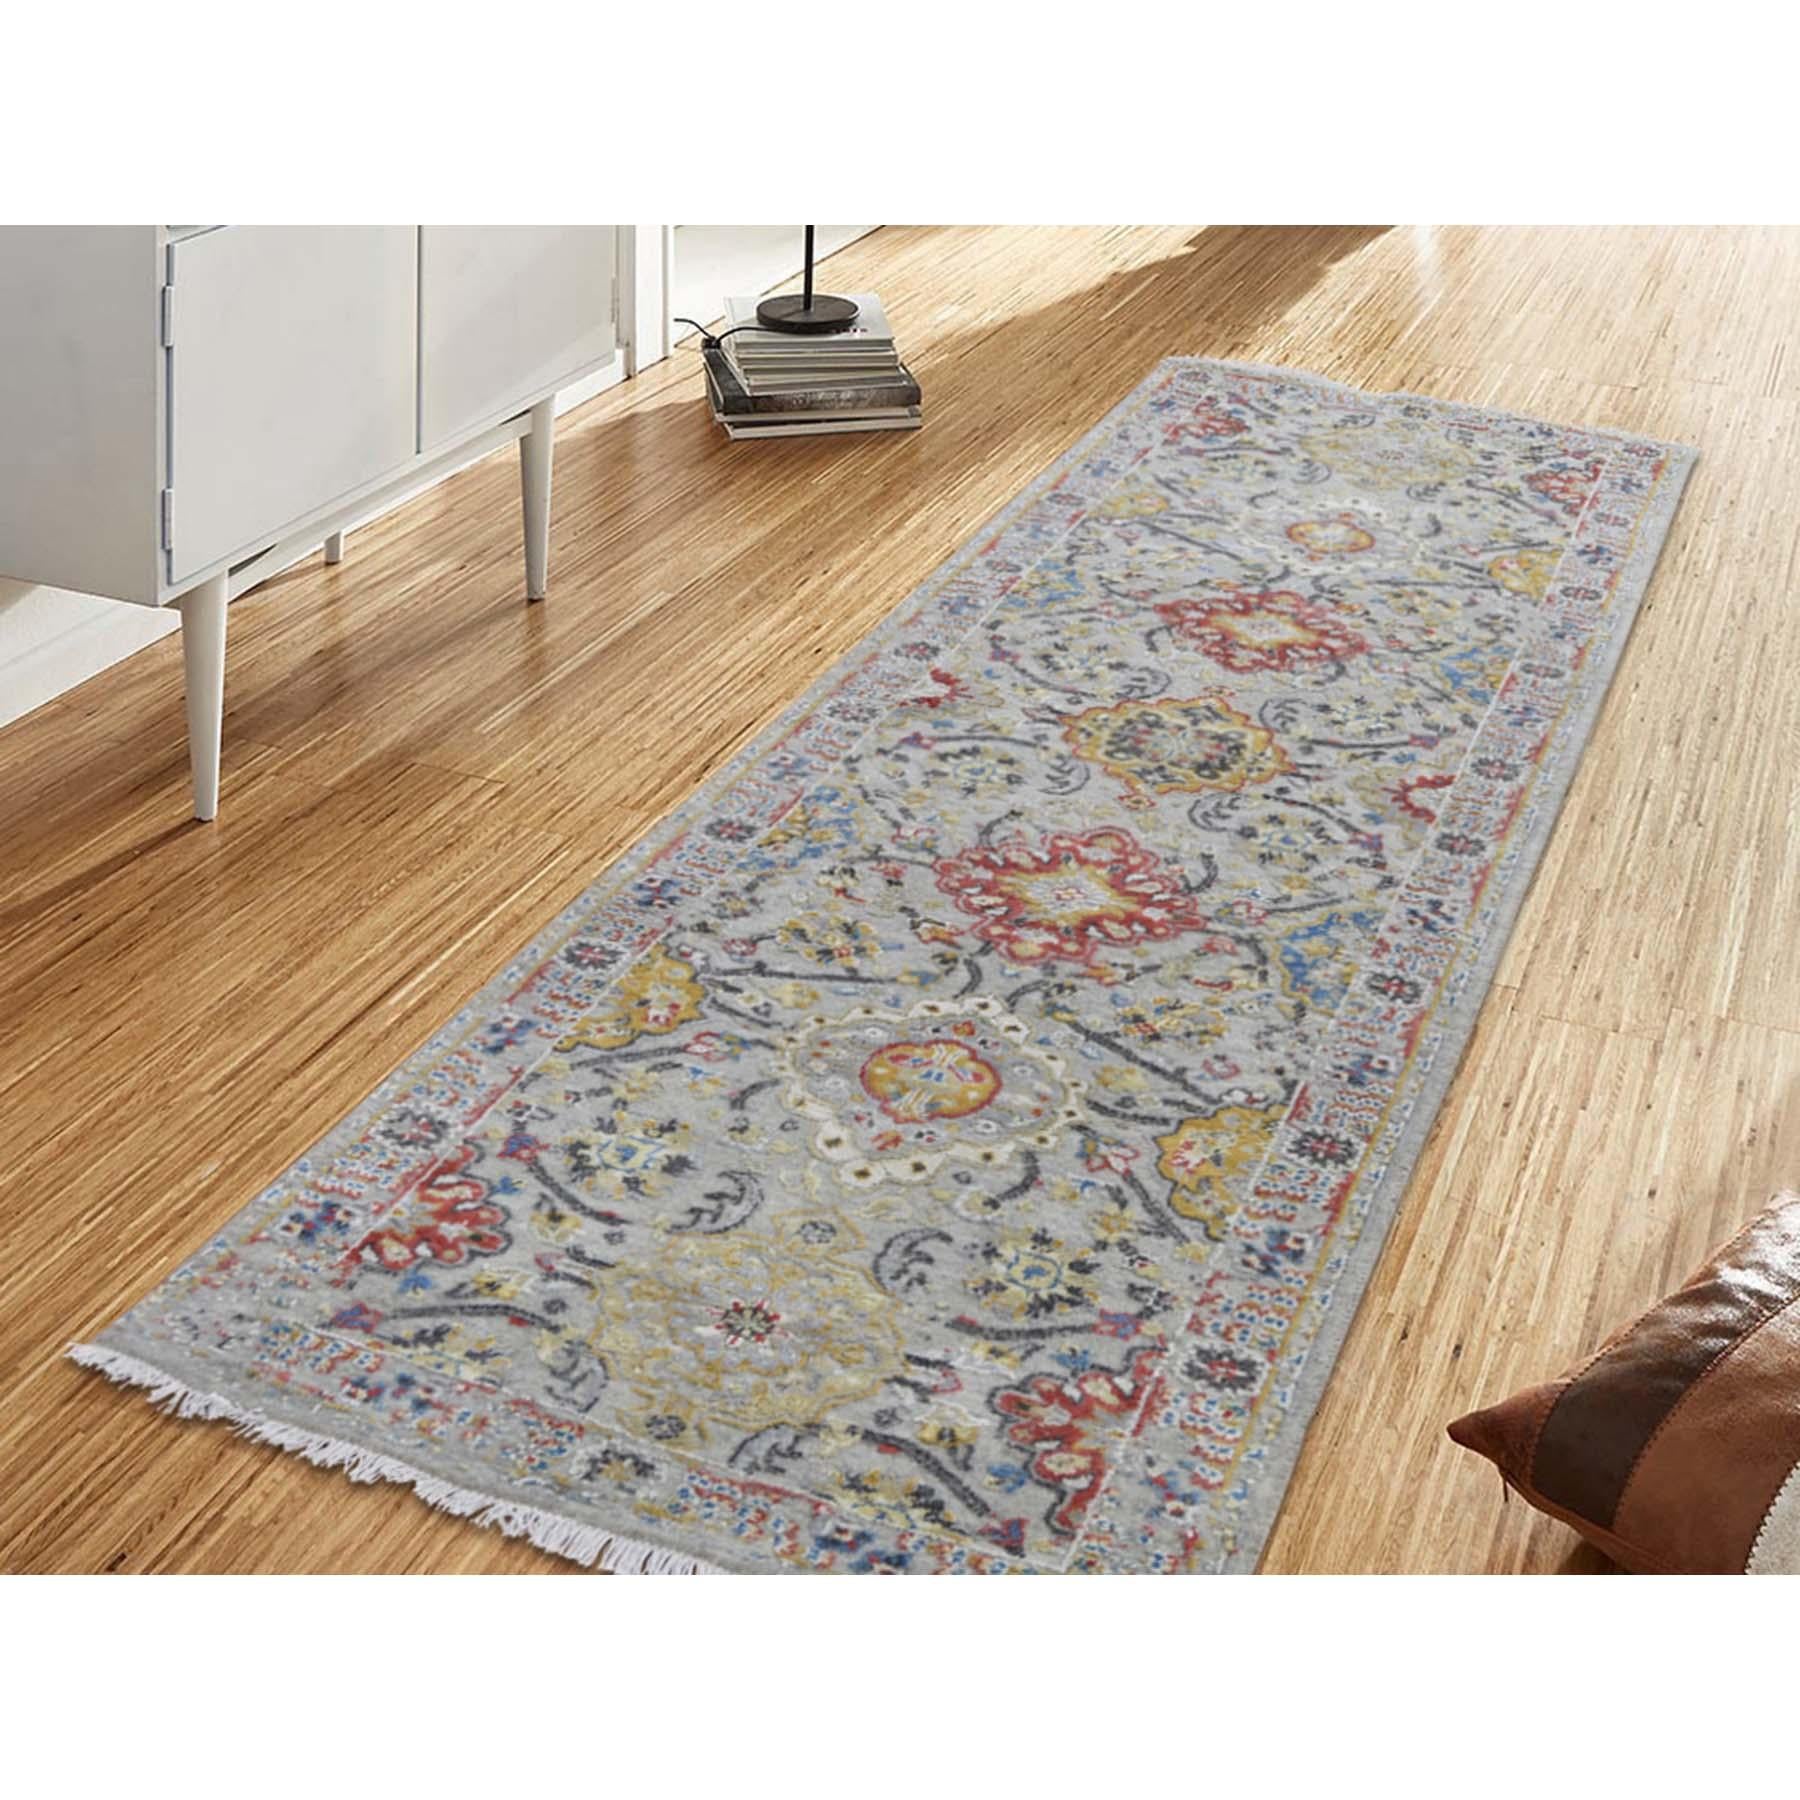 This is a truly genuine one-of-a-kind the sunset rosettes pure silk & wool runner hand knotted Oriental rug. It has been knotted for months and months in the centuries-old Persian weaving craftsmanship techniques by expert artisans. Measures: 2'6